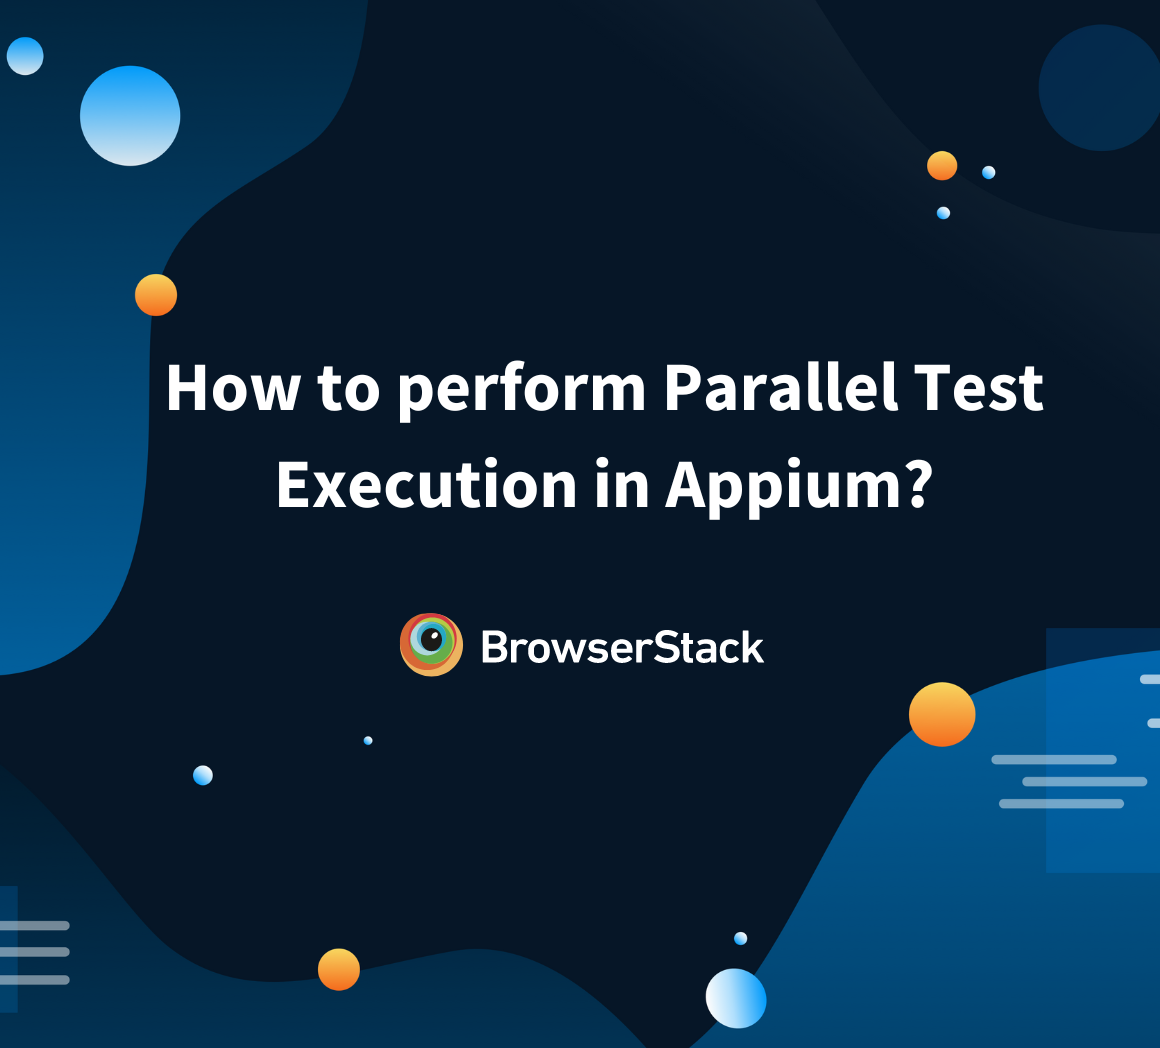 How to perform Parallel Test Execution in Appium